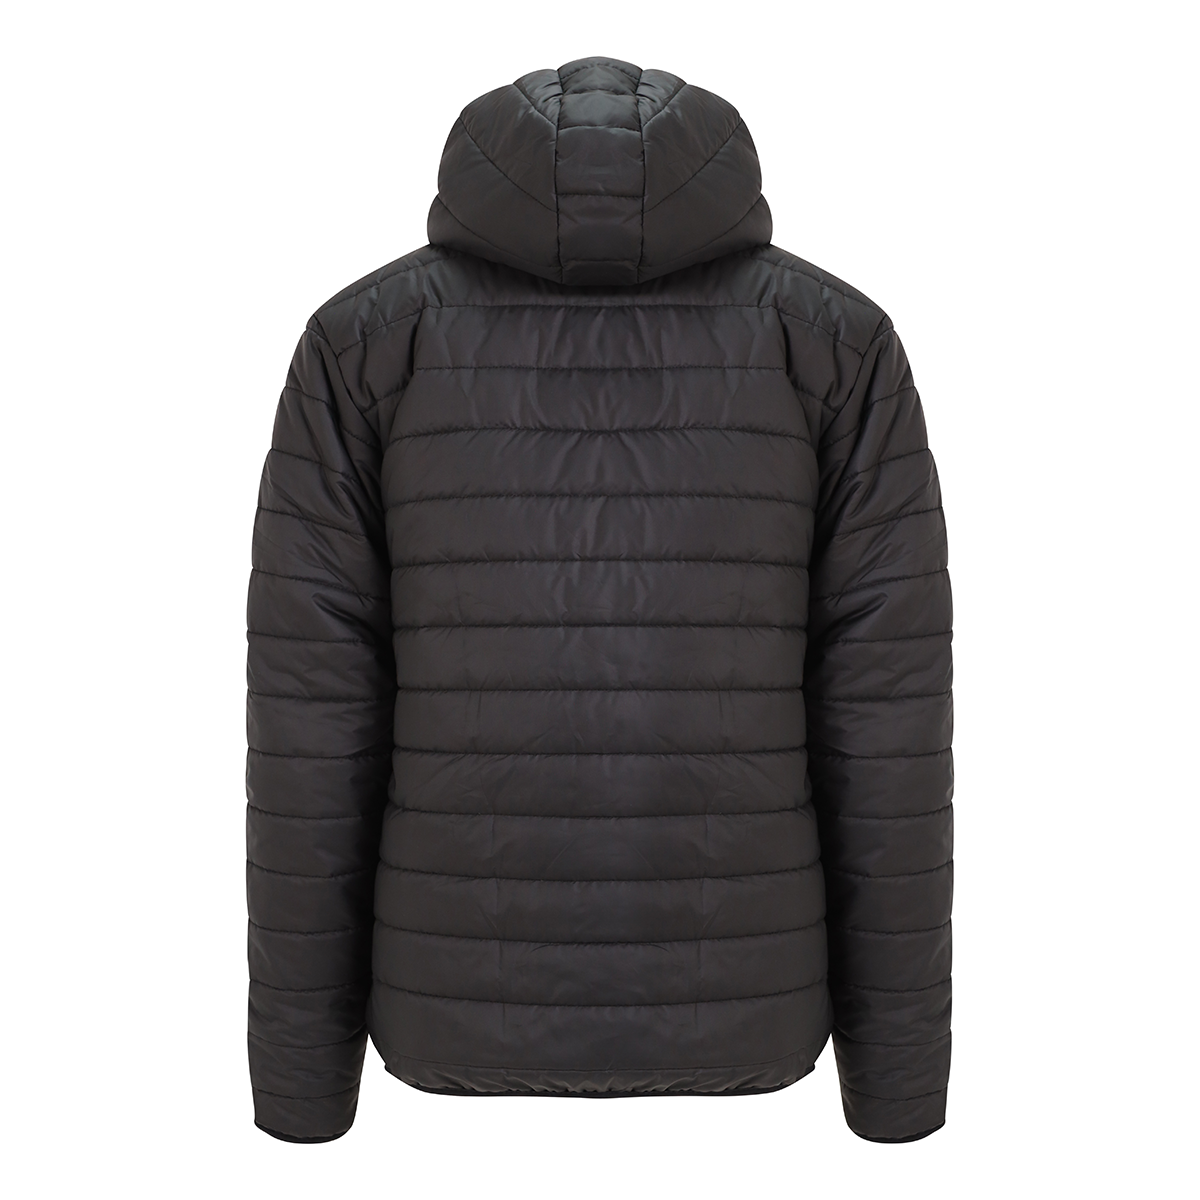 Mc Keever Ashbourne Rugby Core 22 Puffa Jacket - Youth - Black